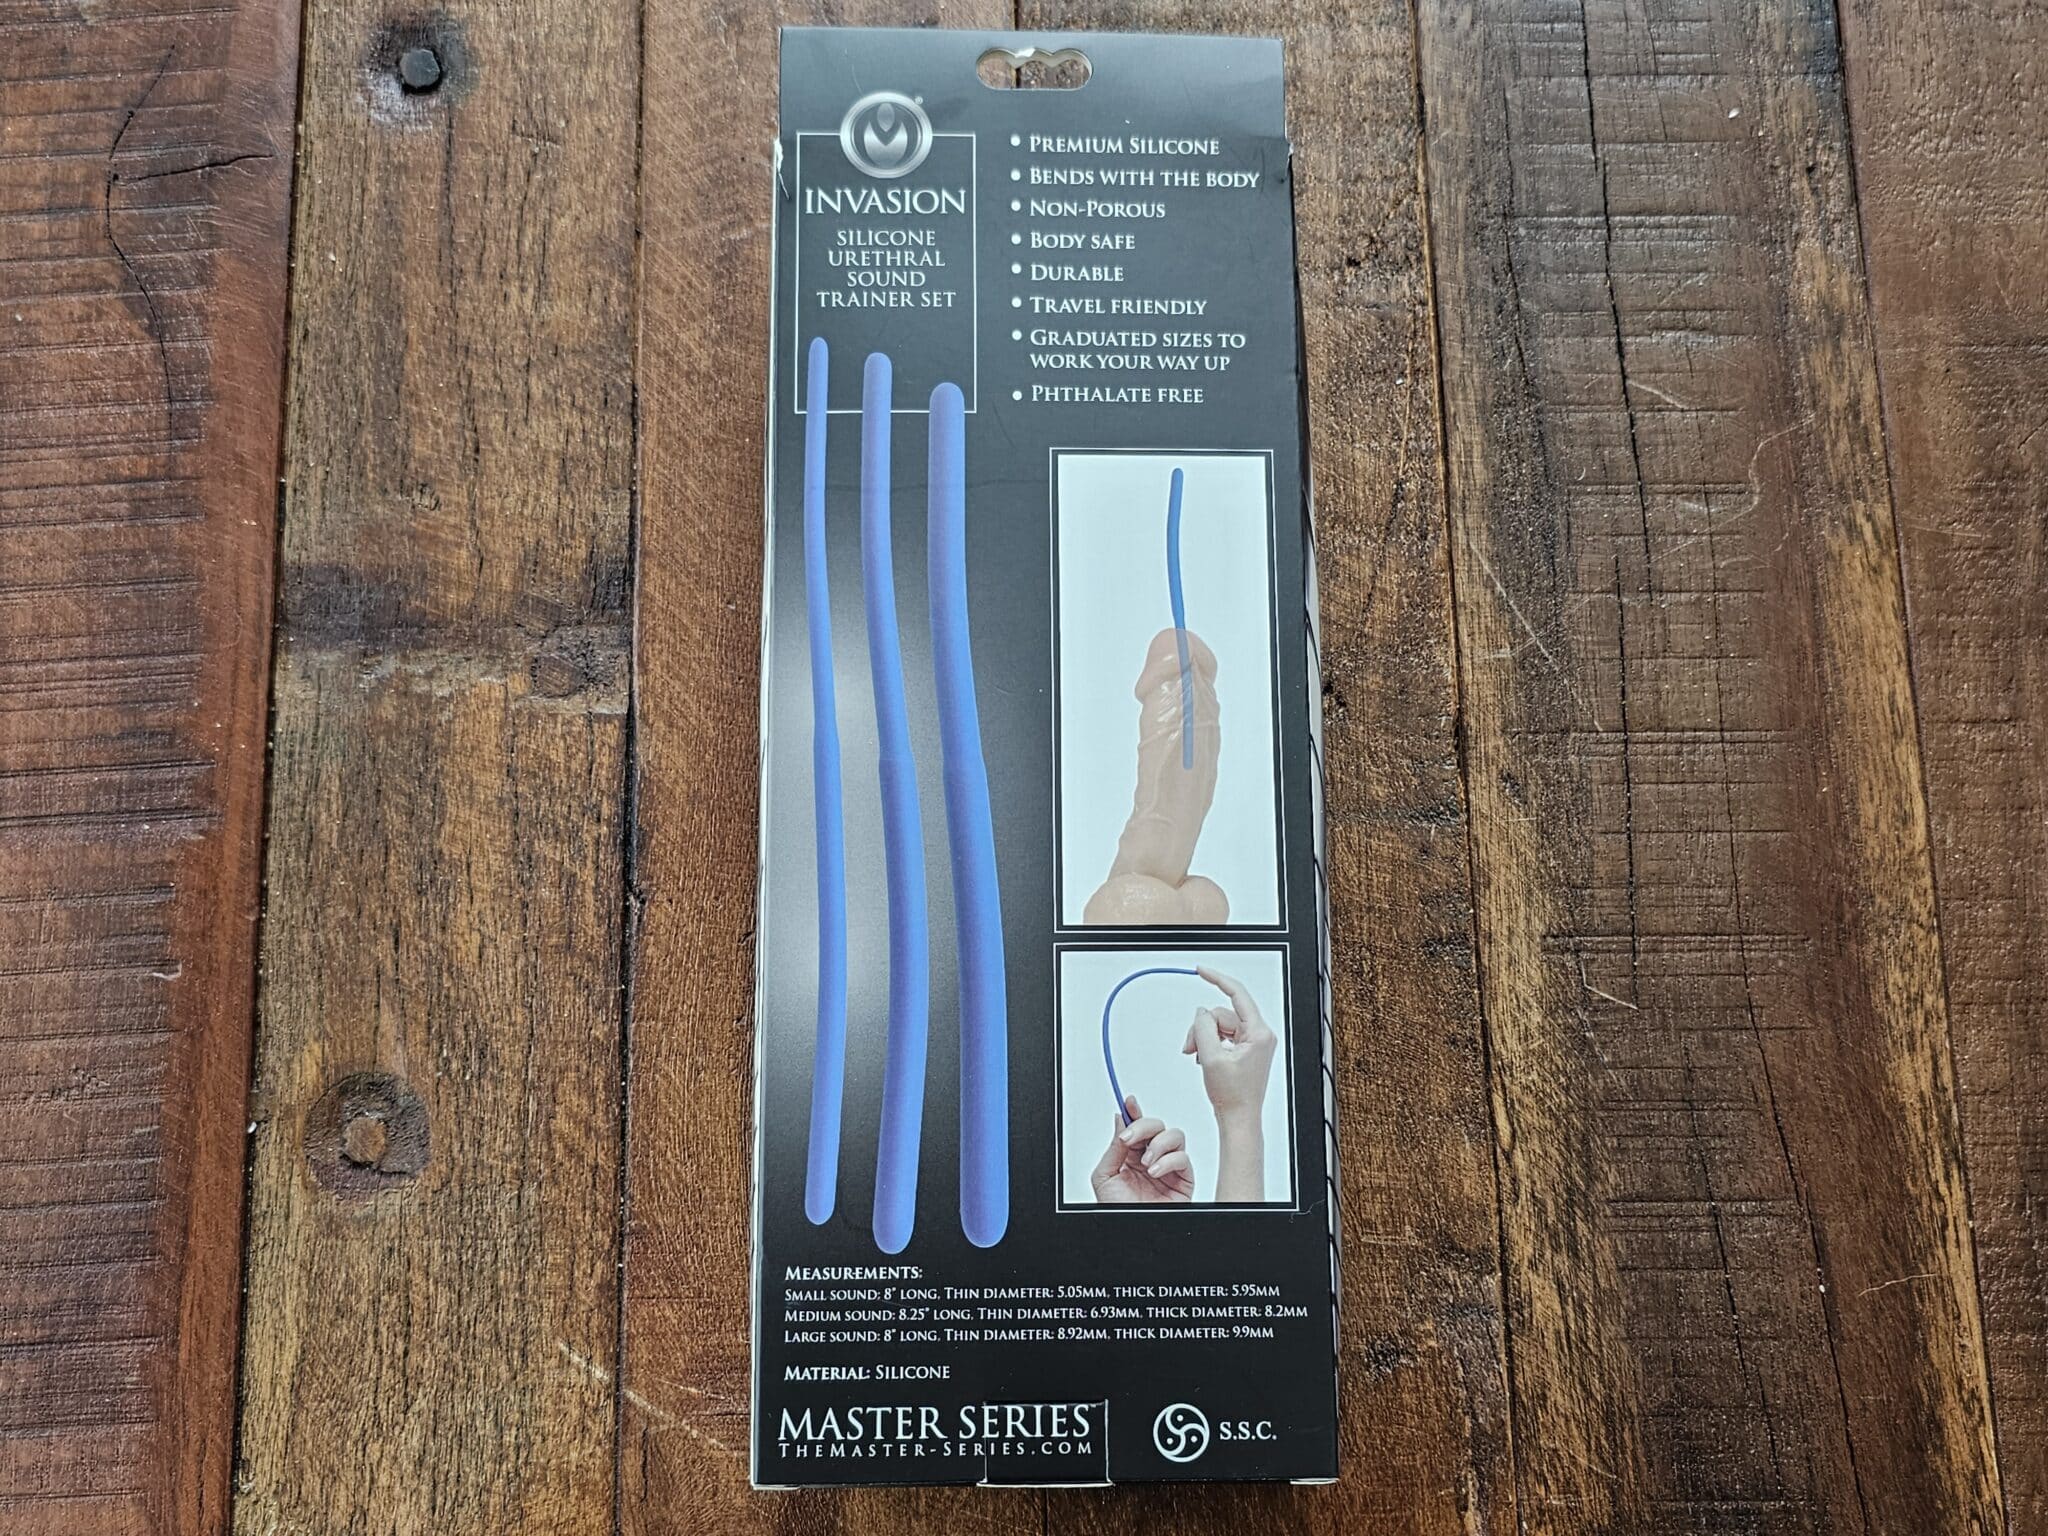 Master Series Invasion Silicone Urethral Sound Trainer Set Analyzing the Packaging: First Impressions